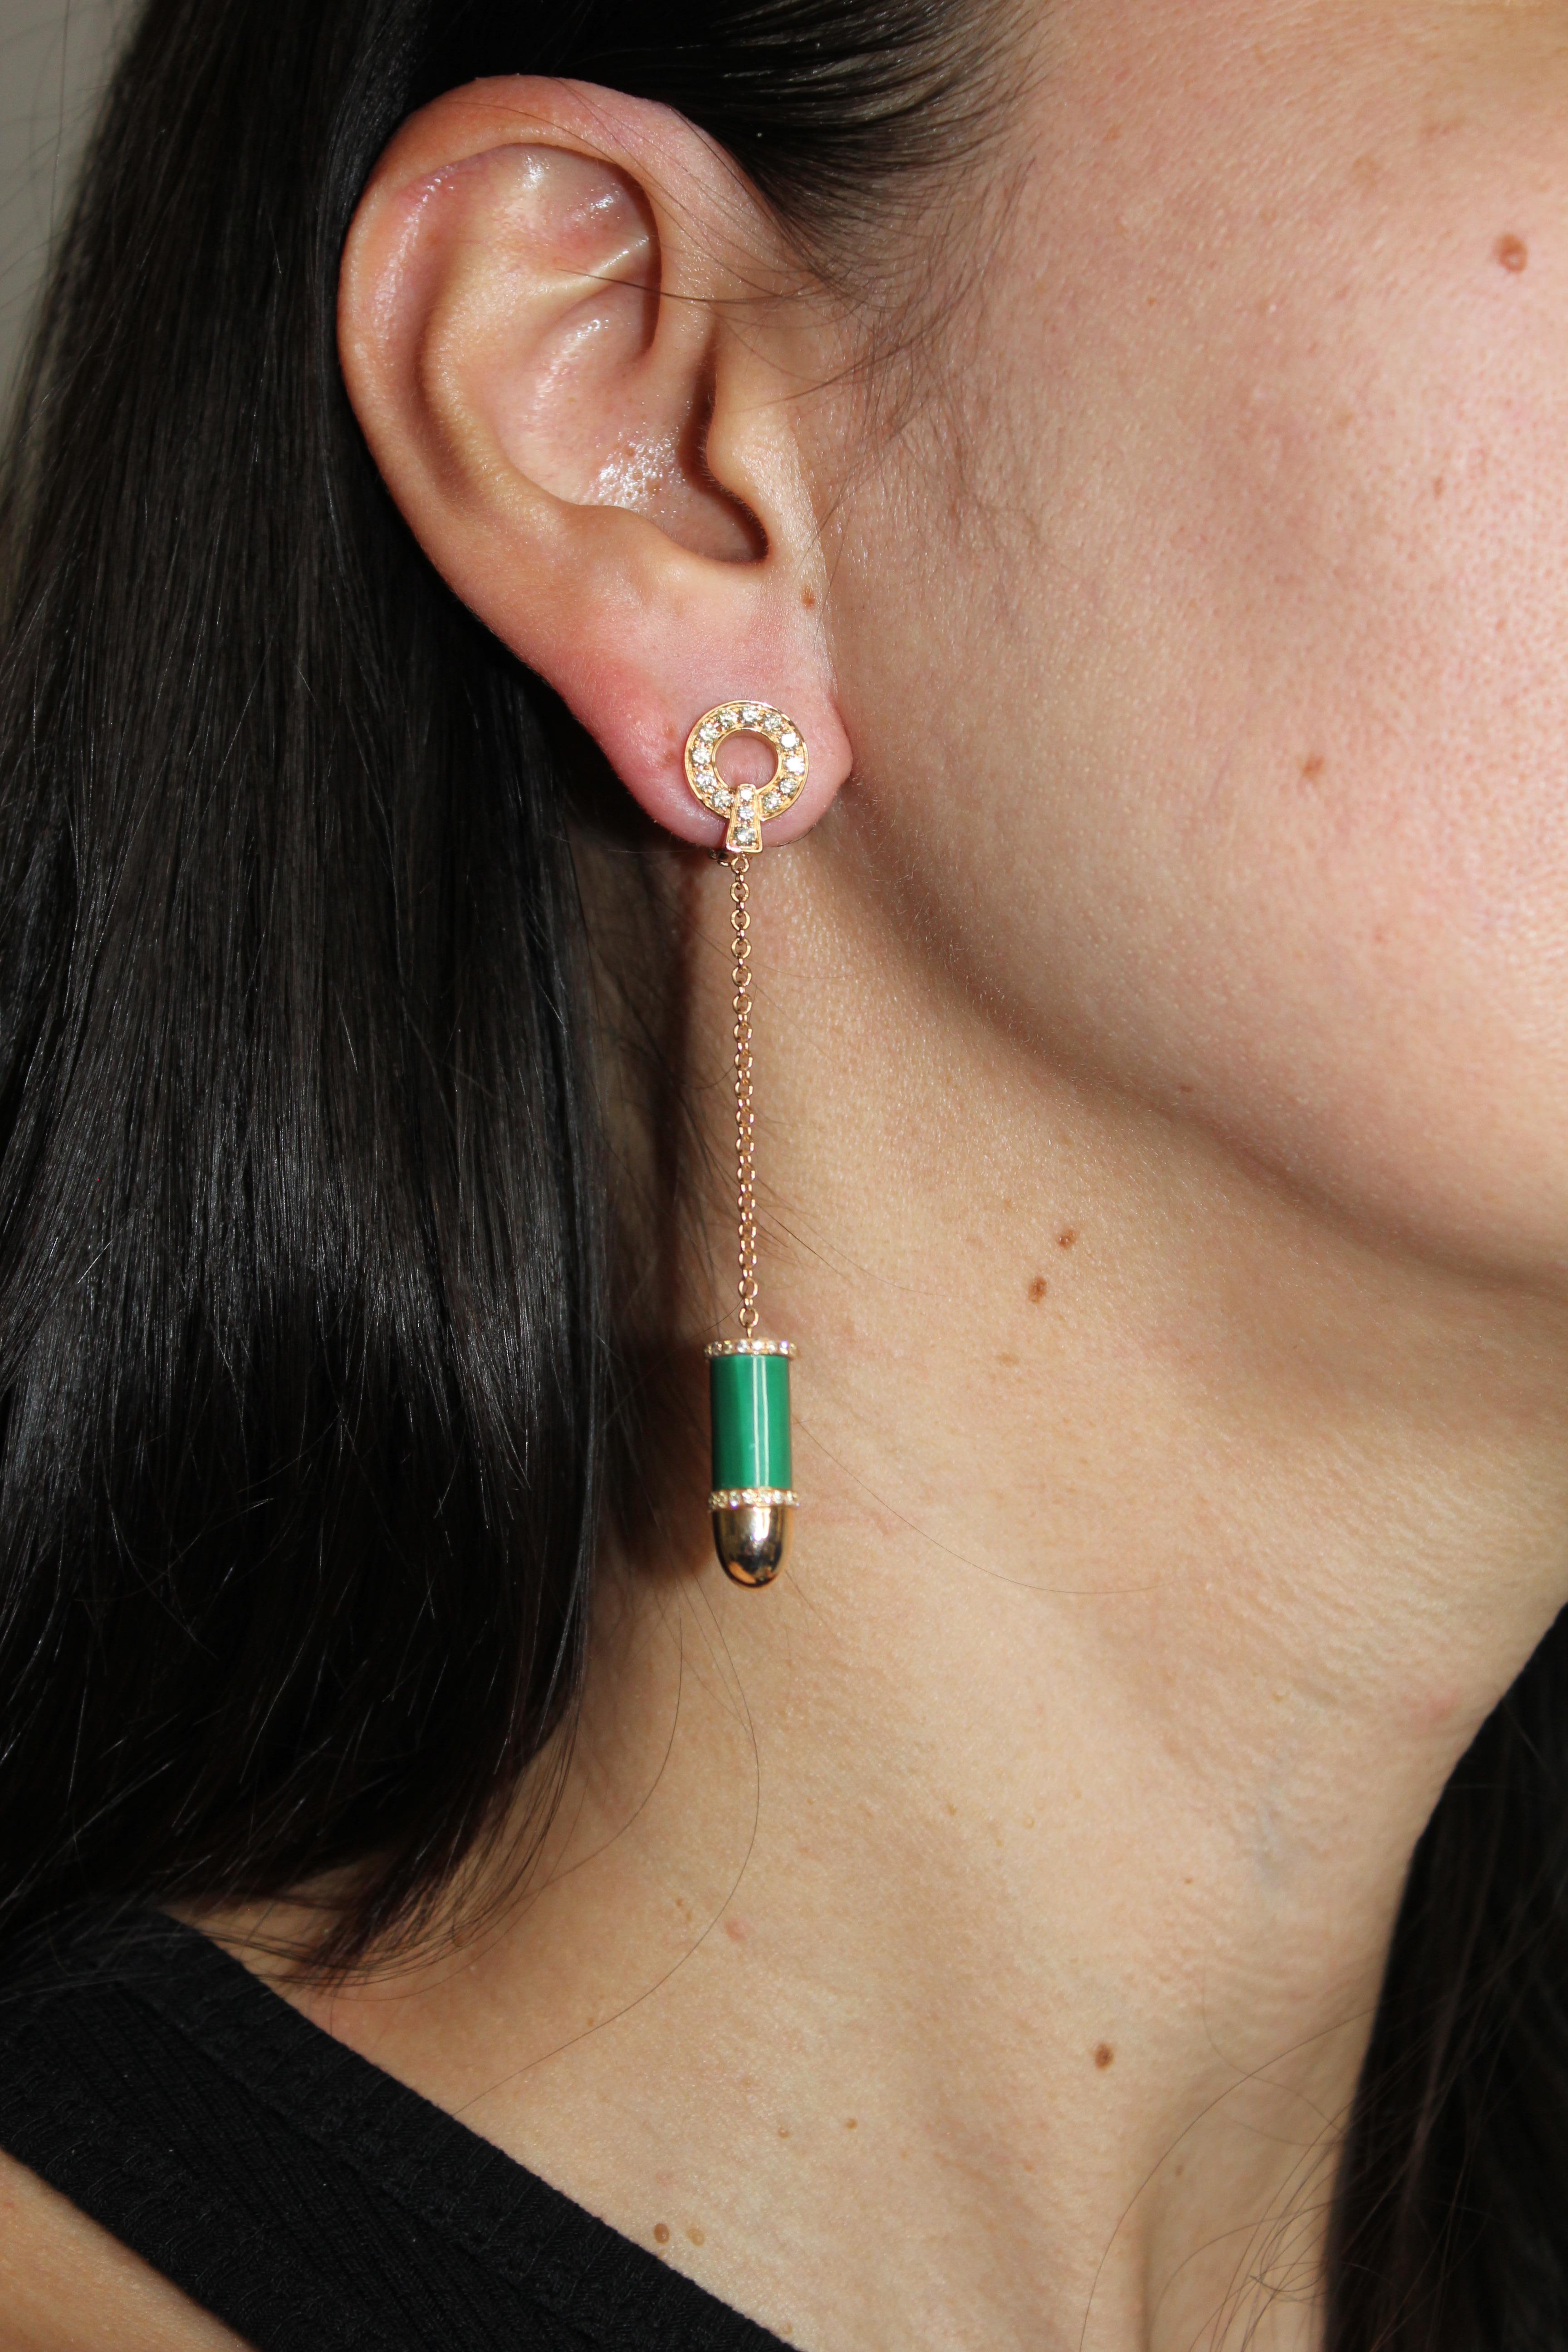 Diamond Green Malachite Gun Revolver 18 Karat Rose Gold Huggie Pave Drop Earrings Set
18K Rose Gold
Green Malachite Bullet Gun Earrings (Two matching earrings = 1 pair)
1.50 cts Pave Diamonds 

This is a combination of solid rose + white gold +